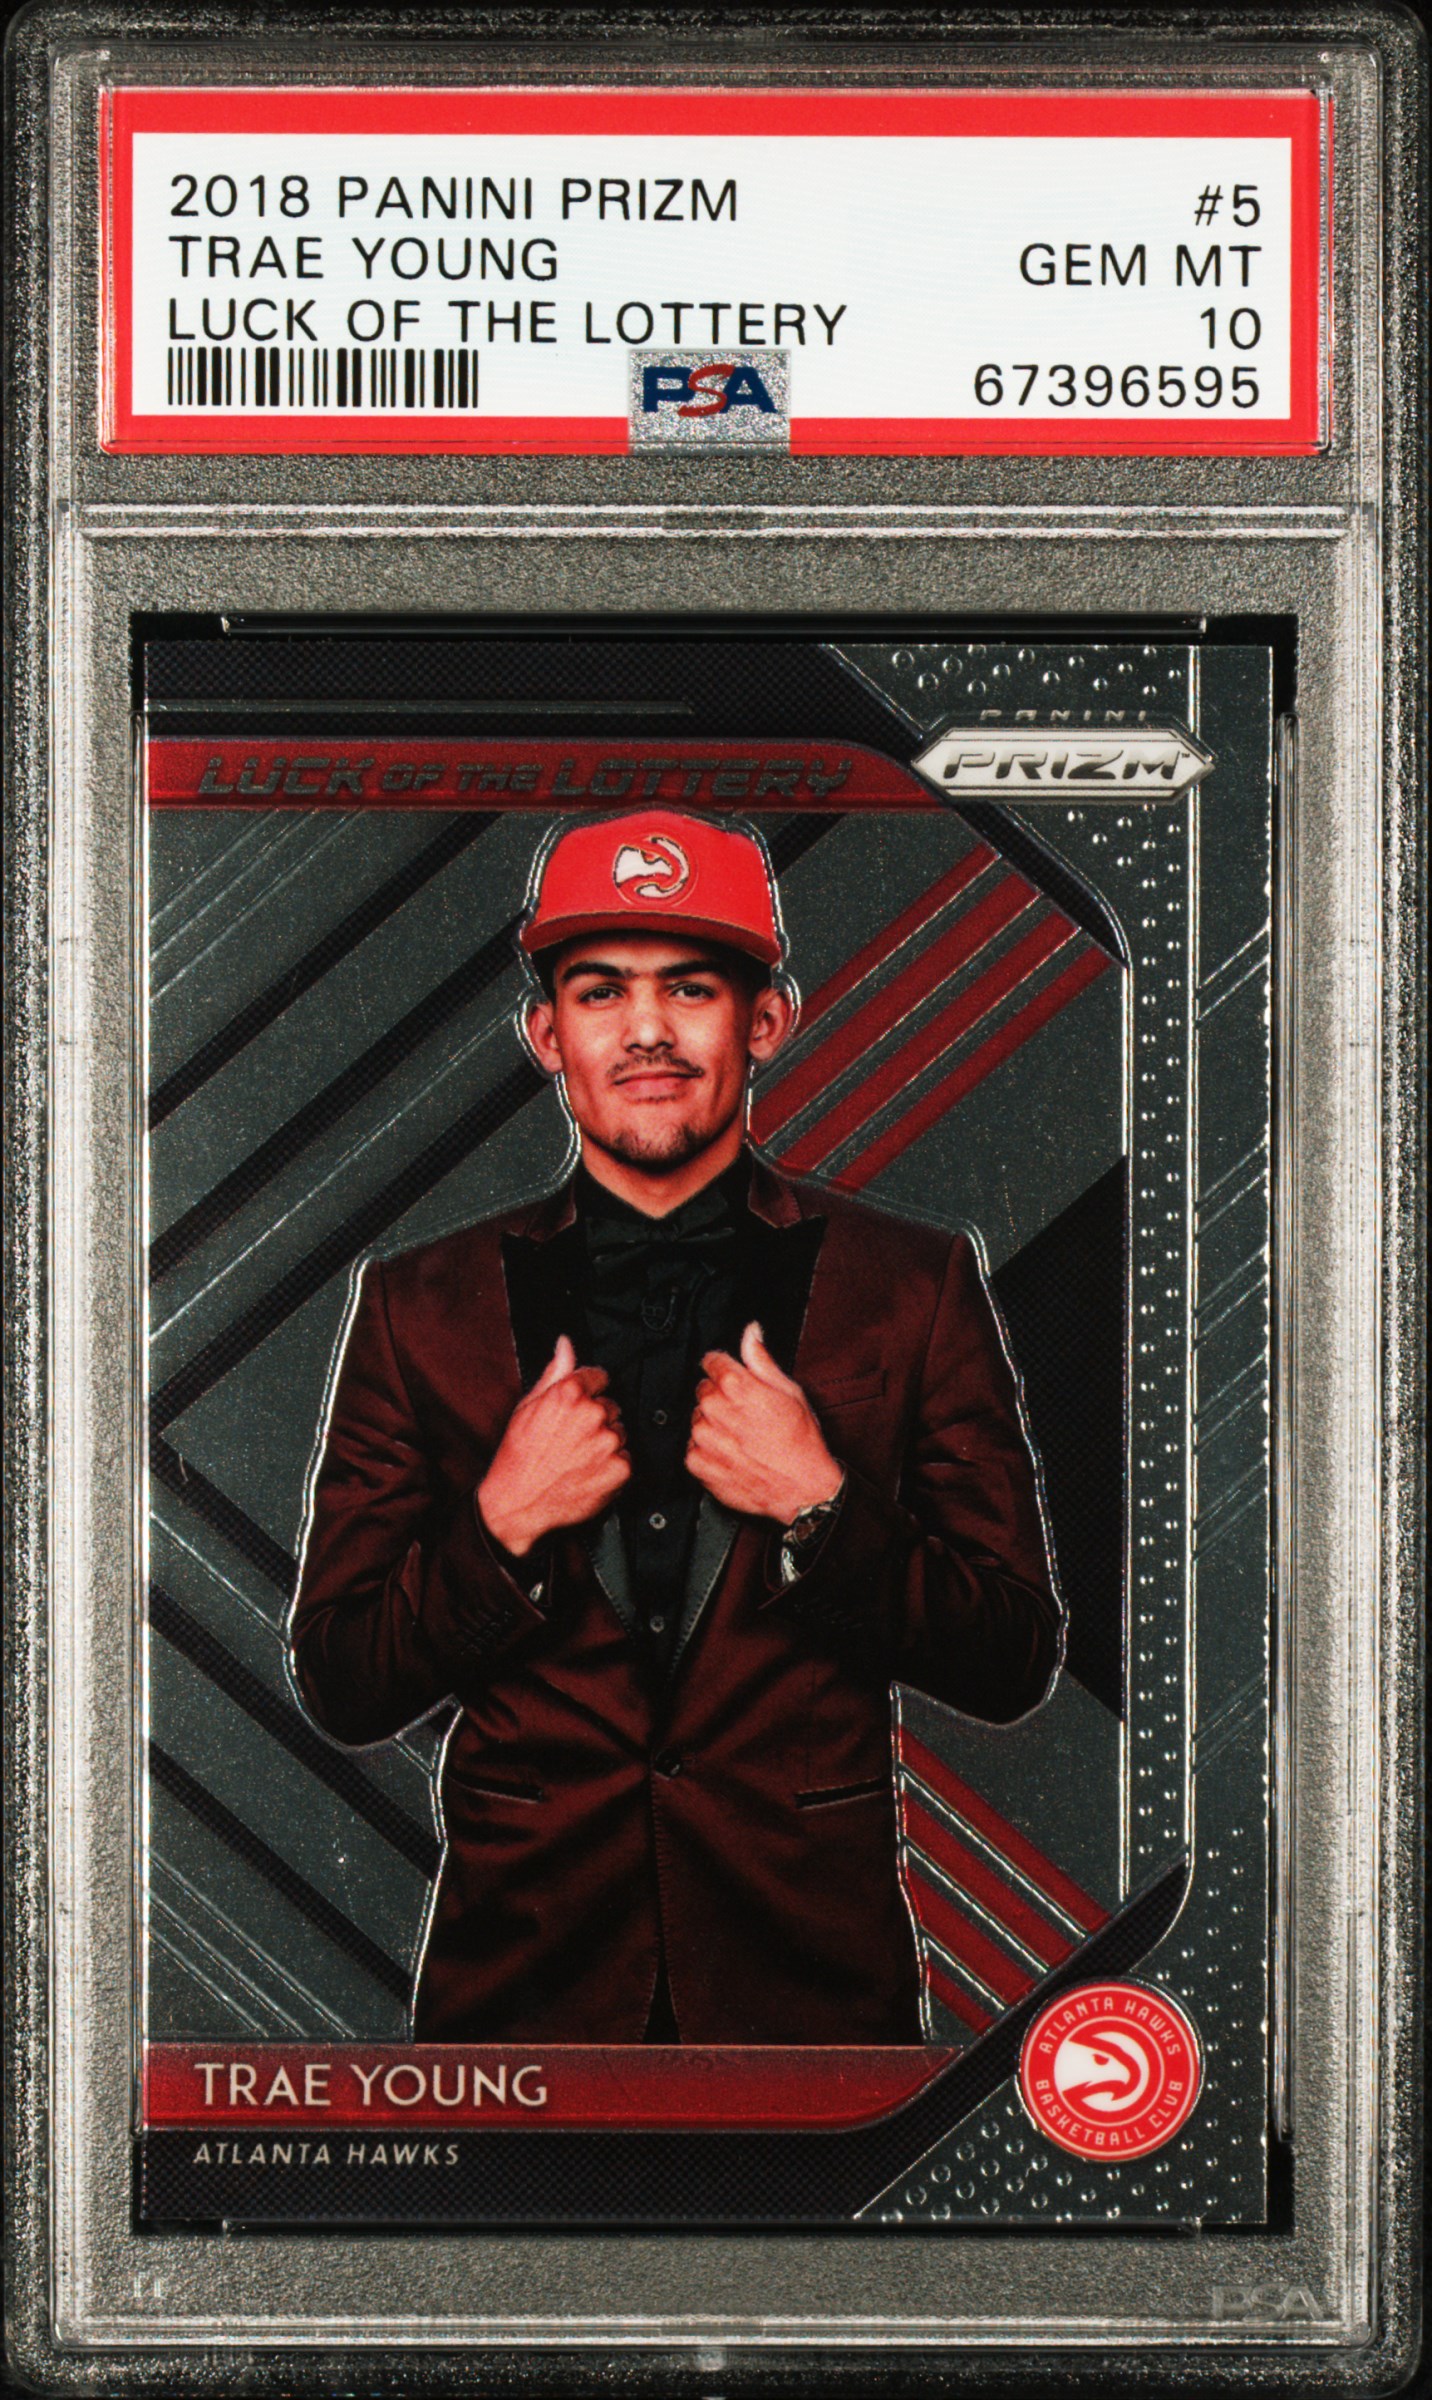 2018-19 Panini Prizm Luck Of The Lottery #5 Trae Young Rookie Card – PSA GEM MT 10